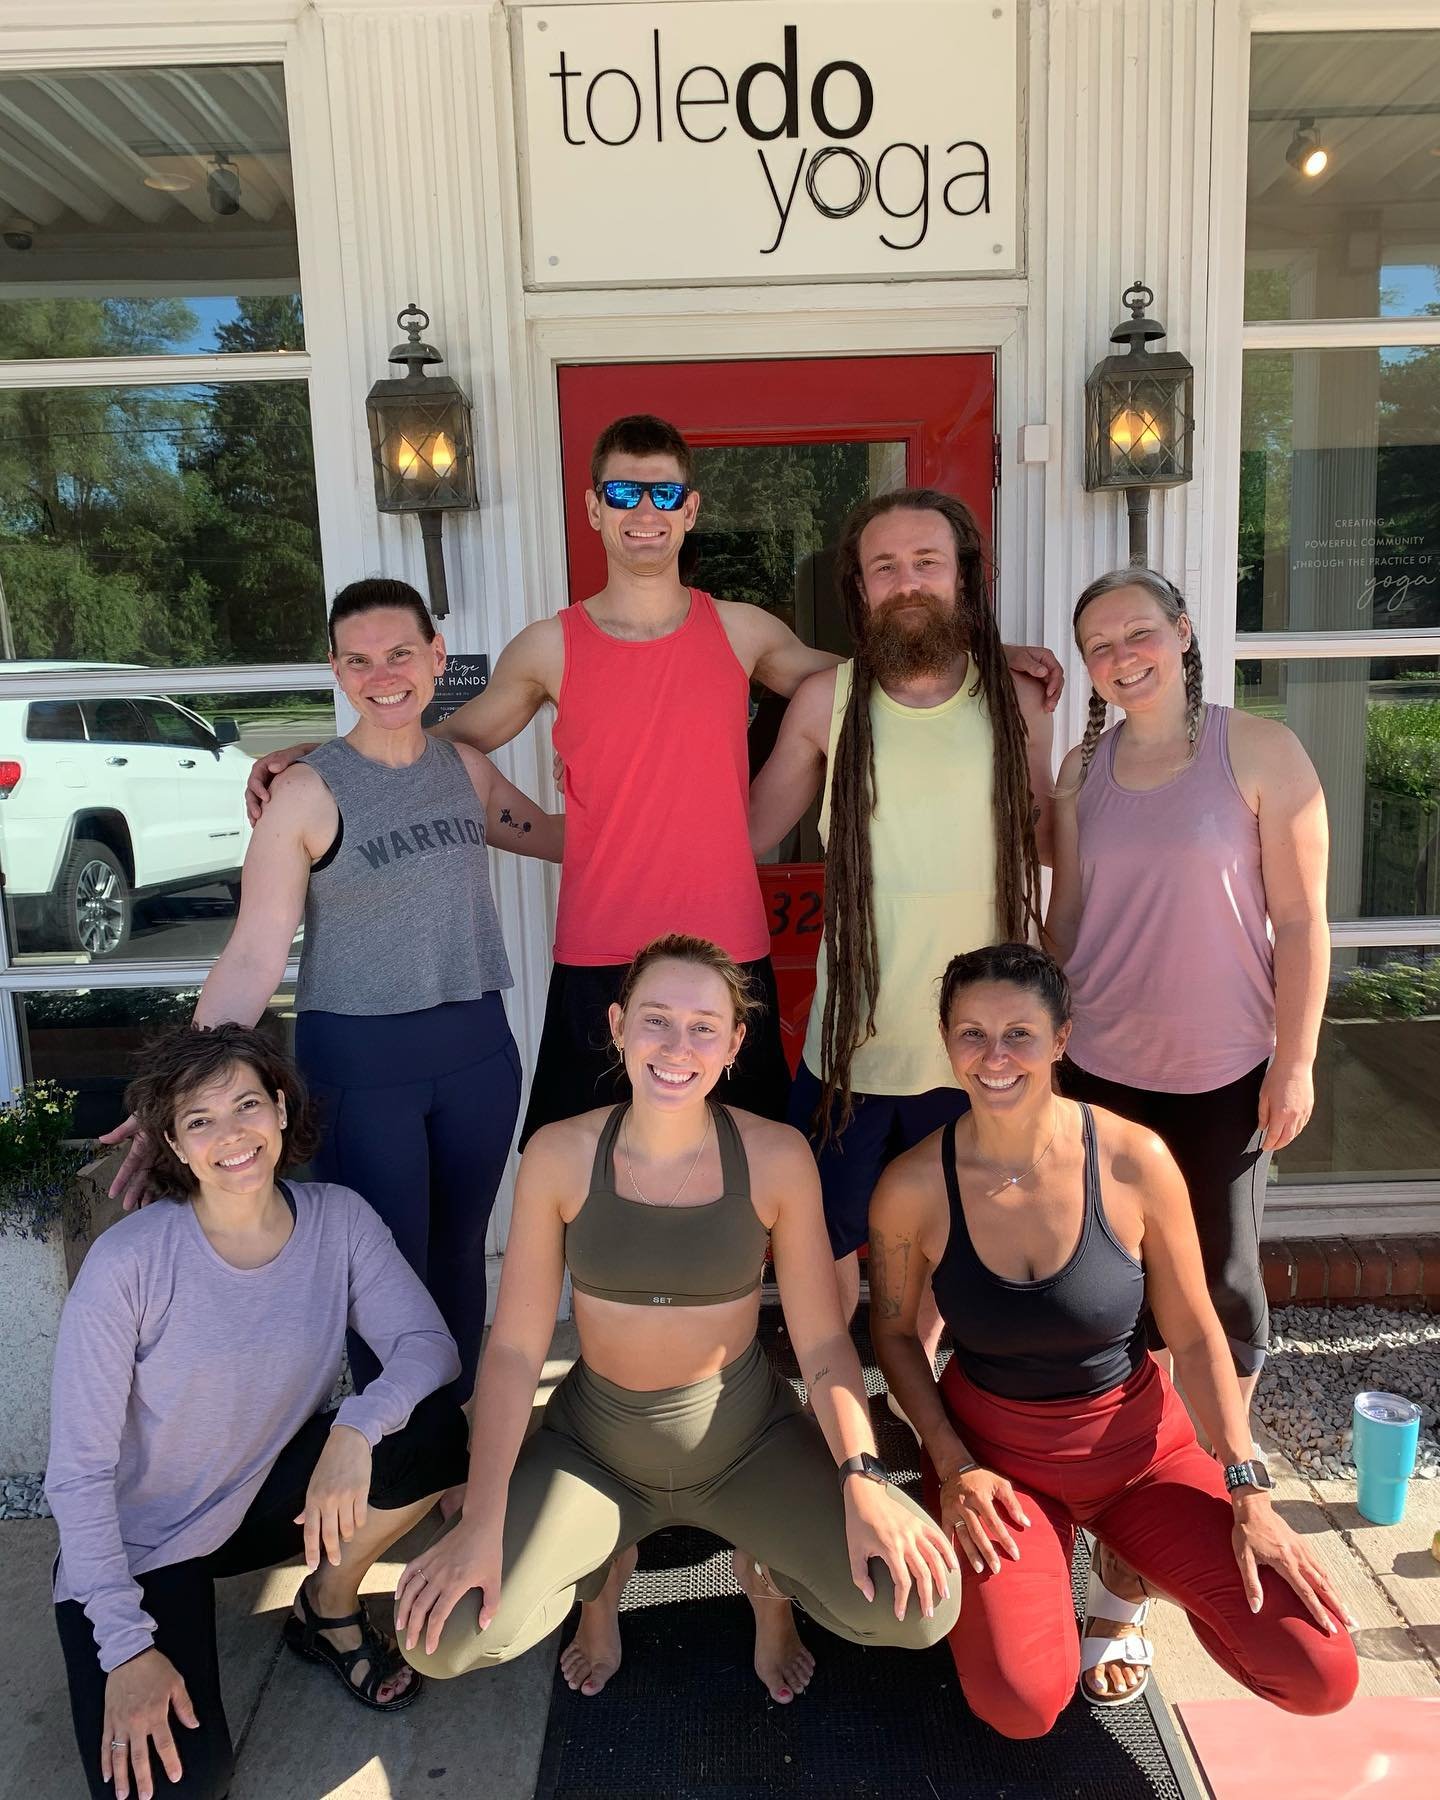 THIS SATURDAY // Join us for an Open House discussing all things Toledo Yoga 200-Hour Summer Intensive Teacher Training! 

We&rsquo;re here to answer all your questions and share all that this training has to offer. If you&rsquo;re seeking transforma